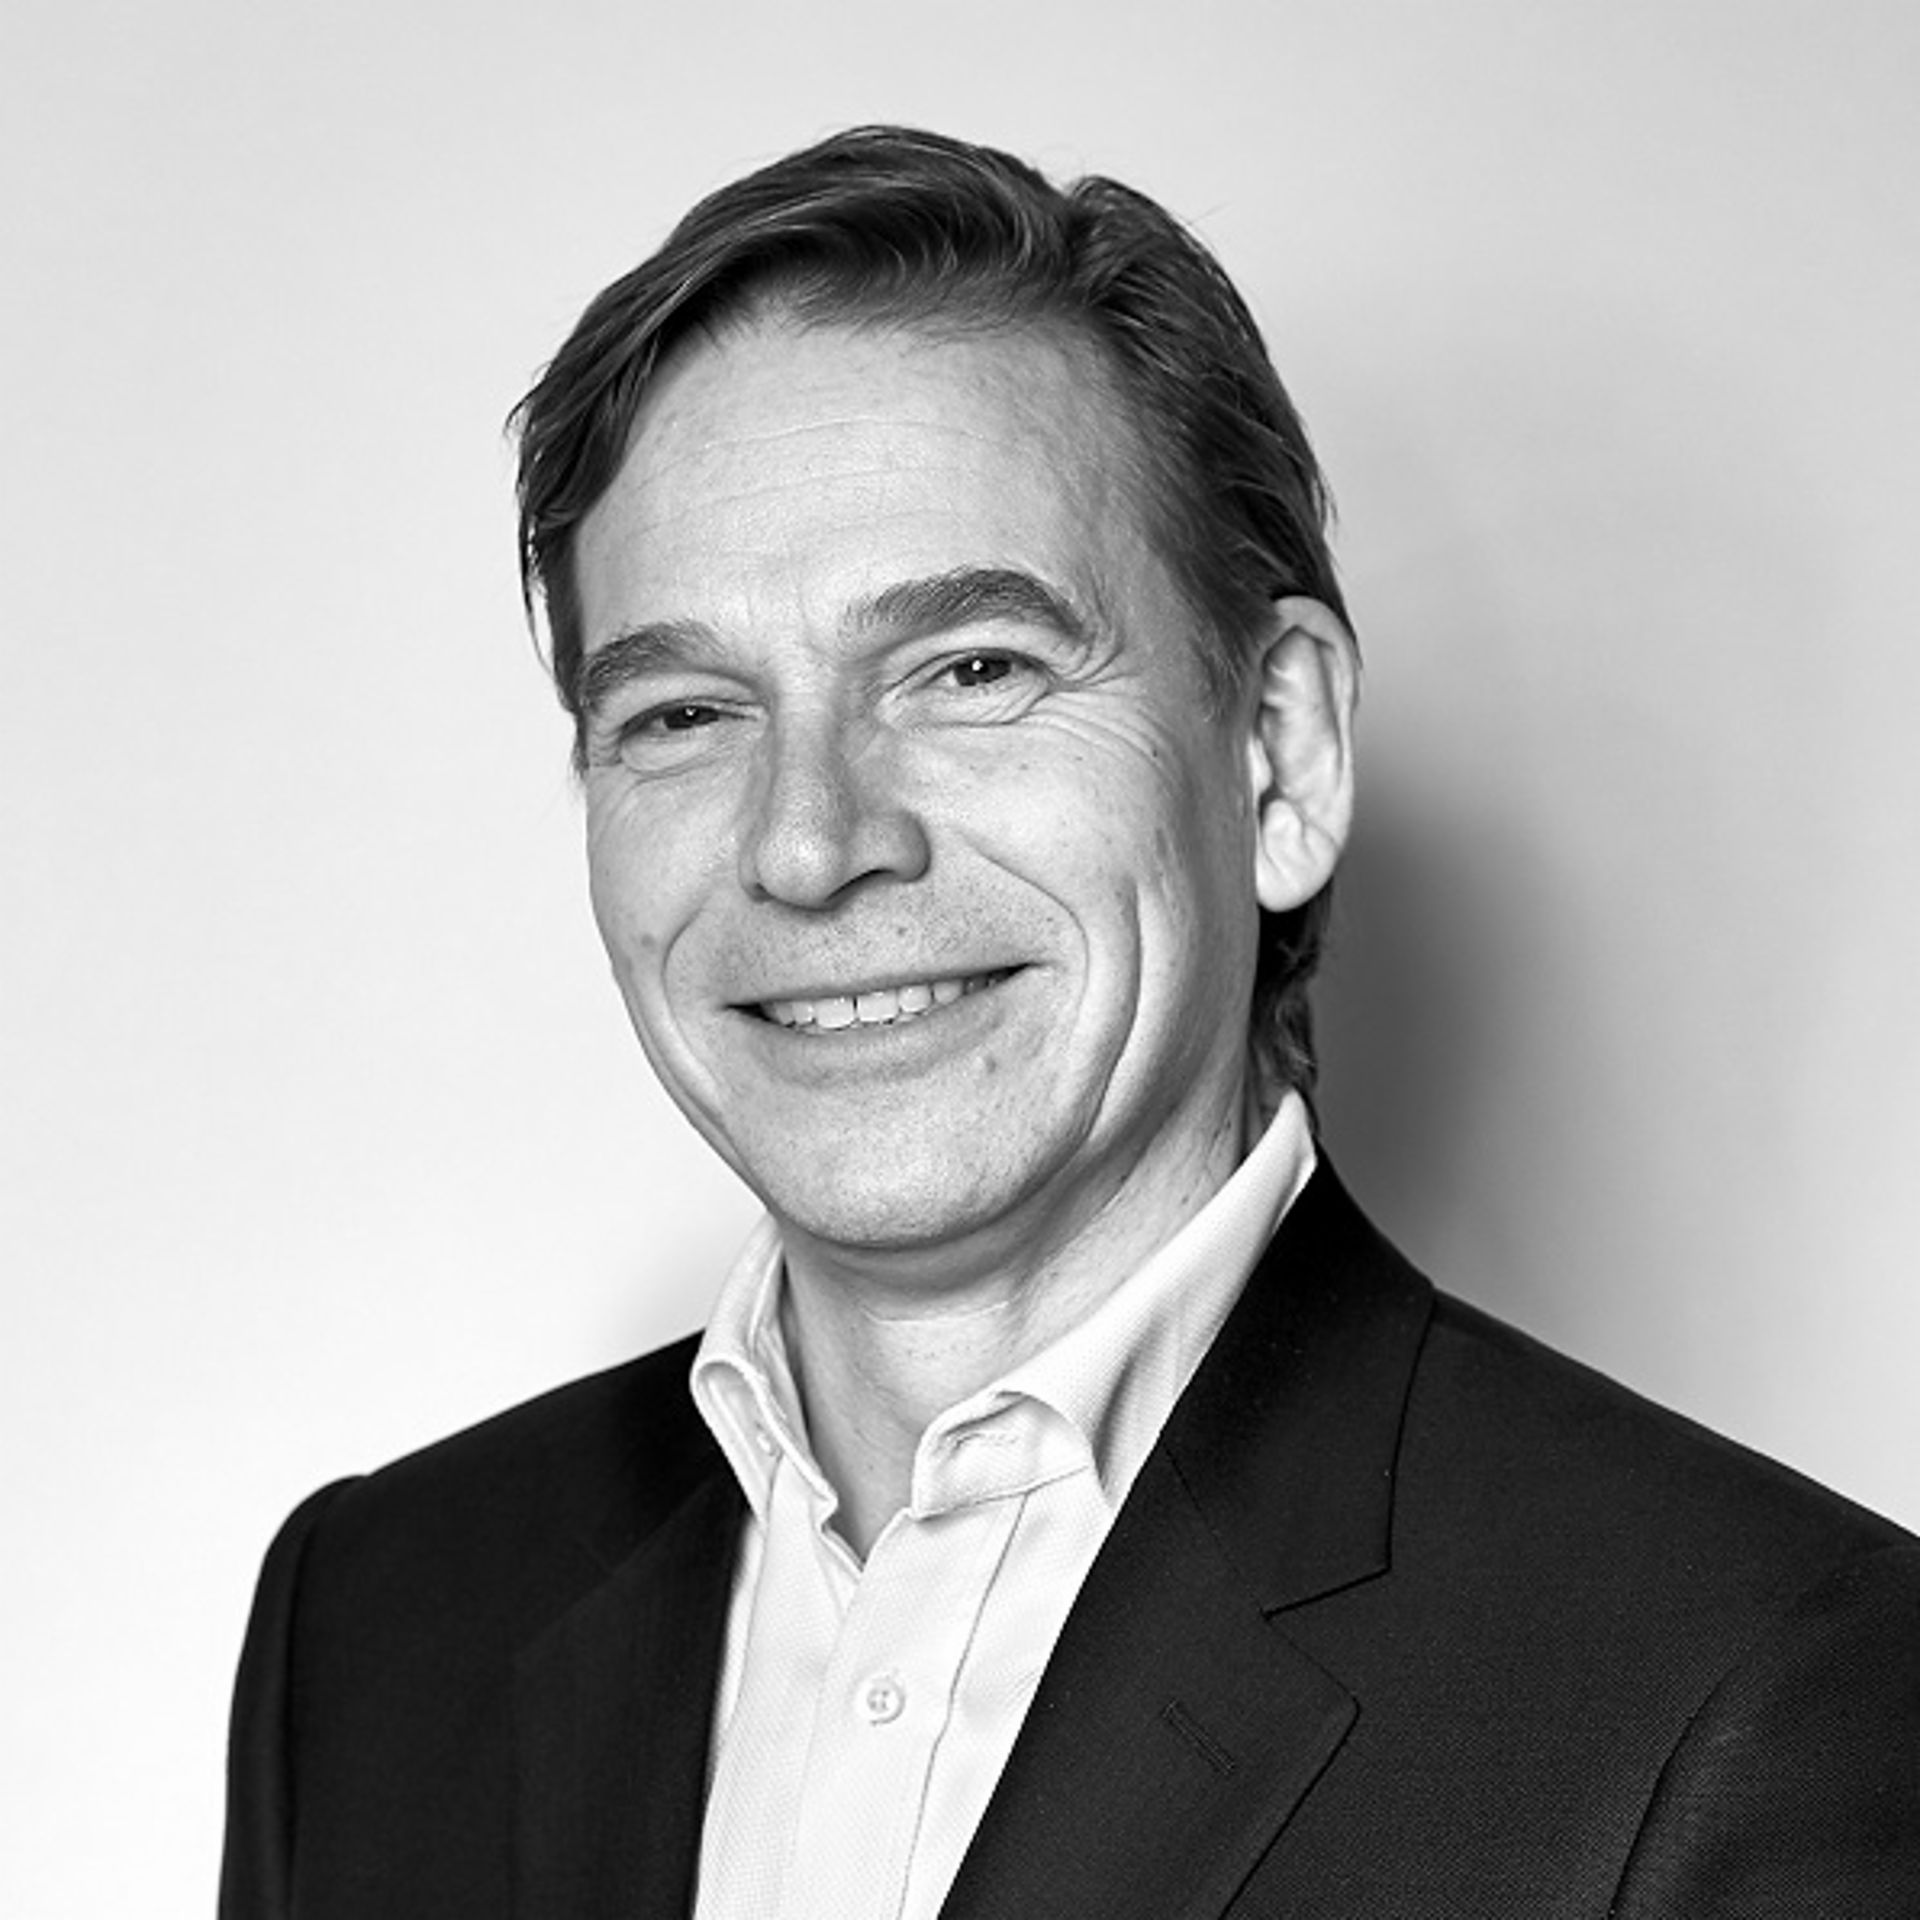 black and white portrait of  Christian Levin, Chief Executive Officer of TRATON SE and Chief Executive Officer Scania